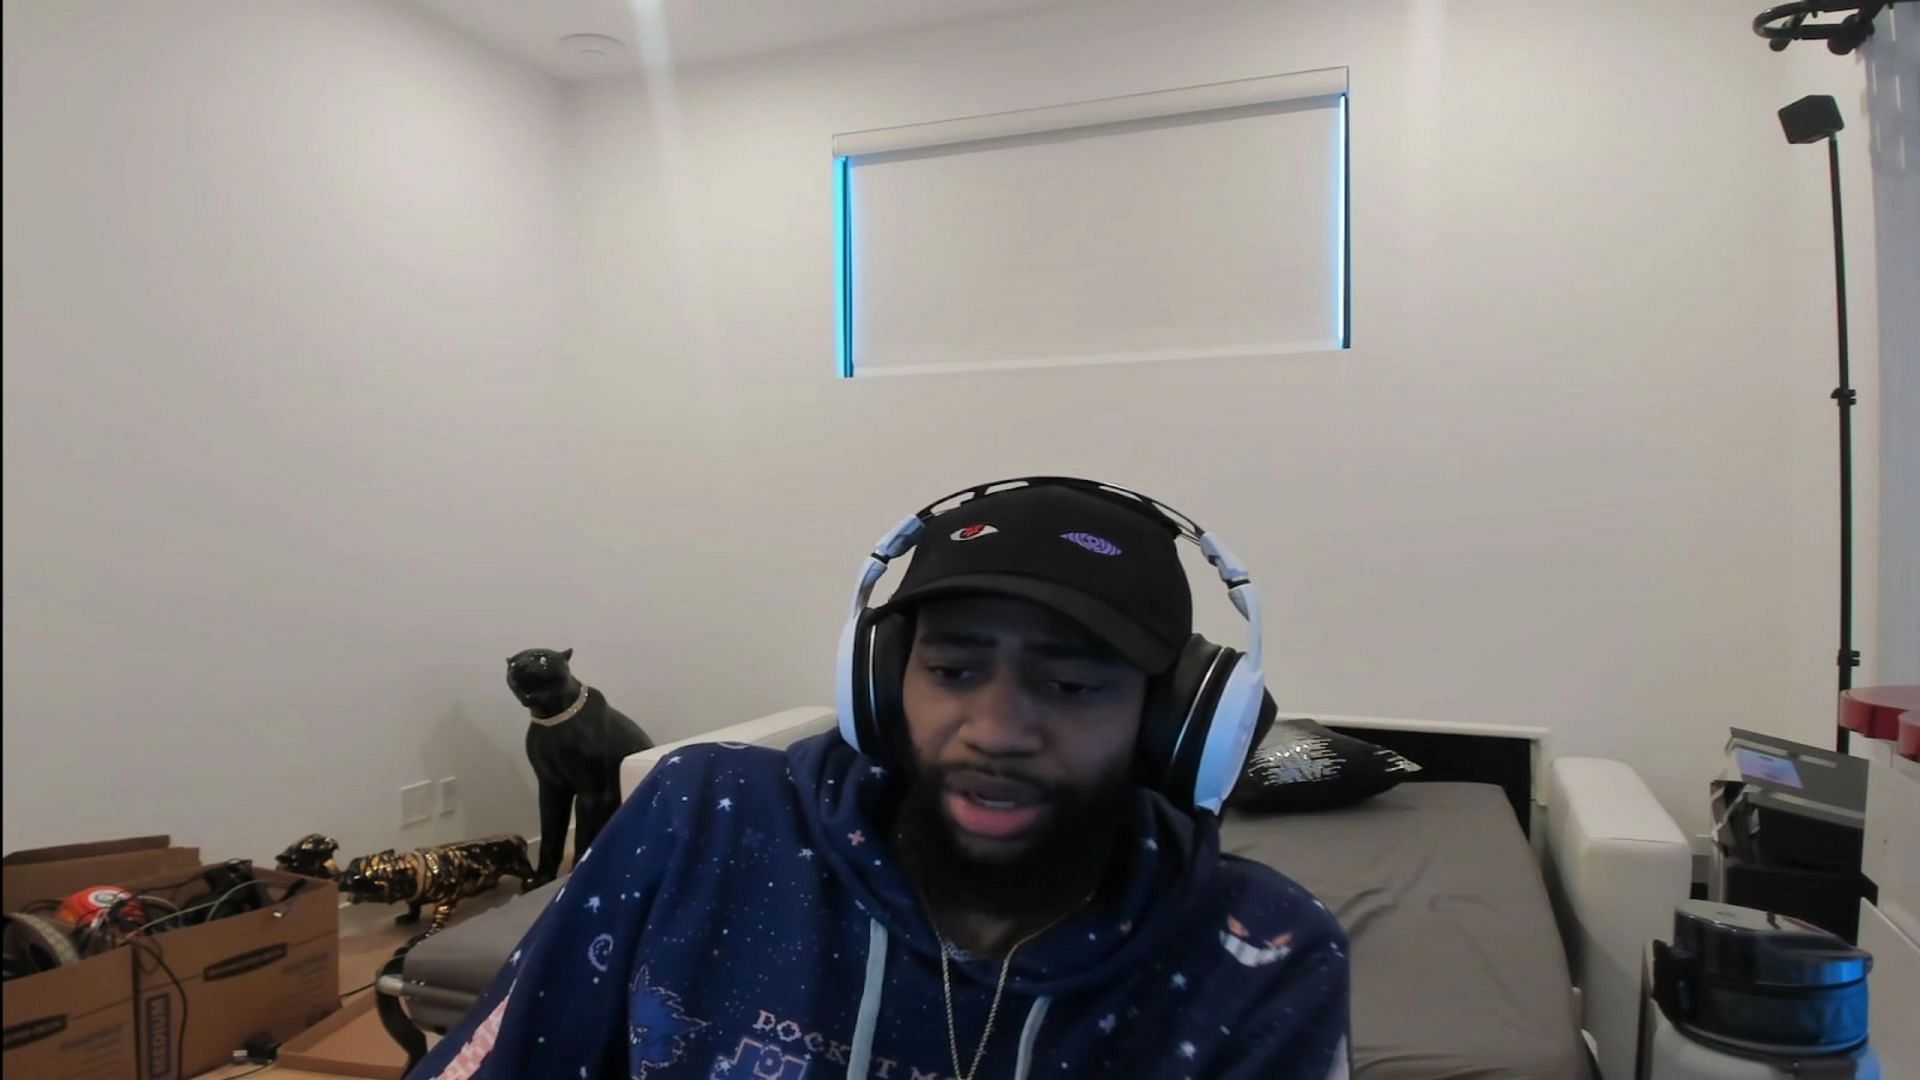 Daequan Loco talks about alleged problems with the NRG Thoom House (Images via Twitch.tv/daequanwoco)